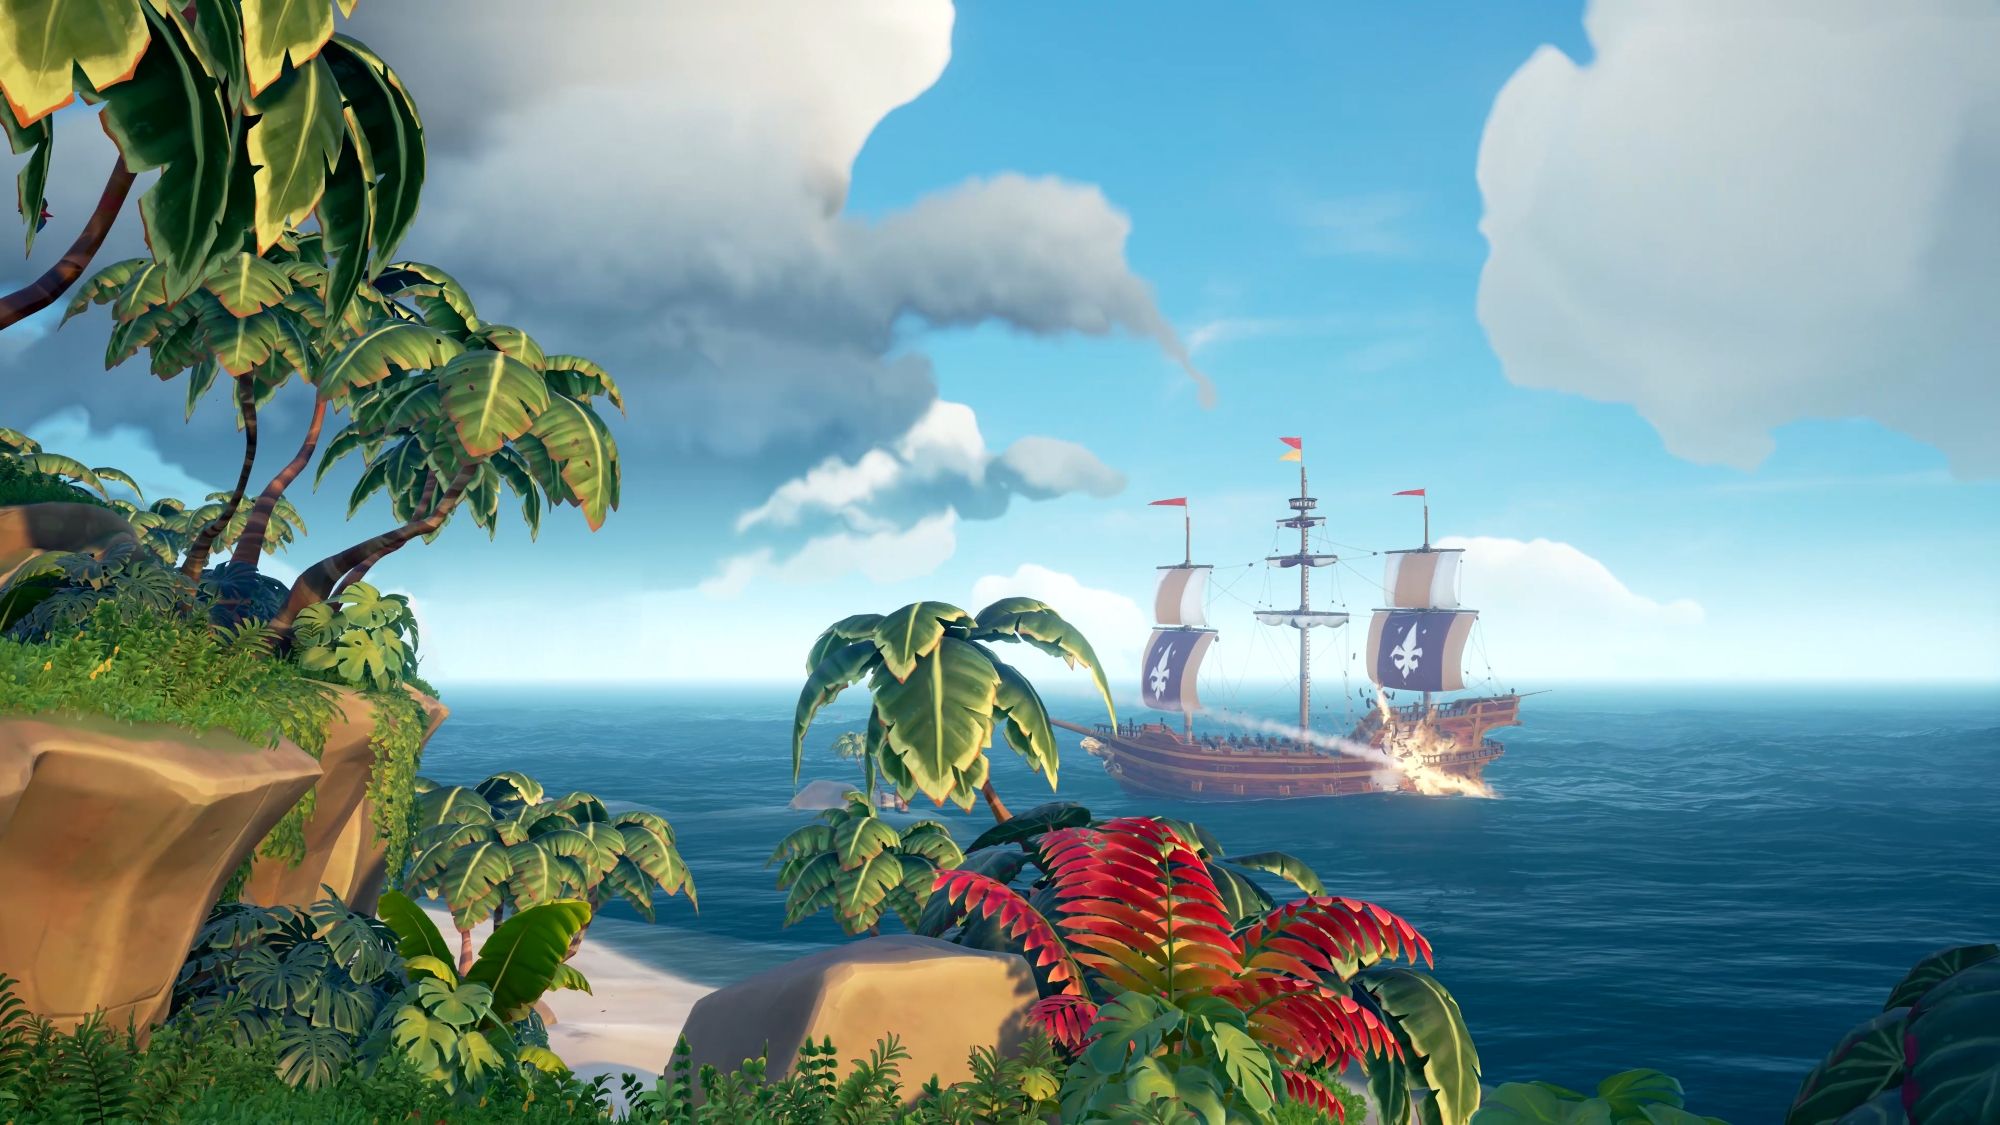 Sea of Thieves closed beta coming this January